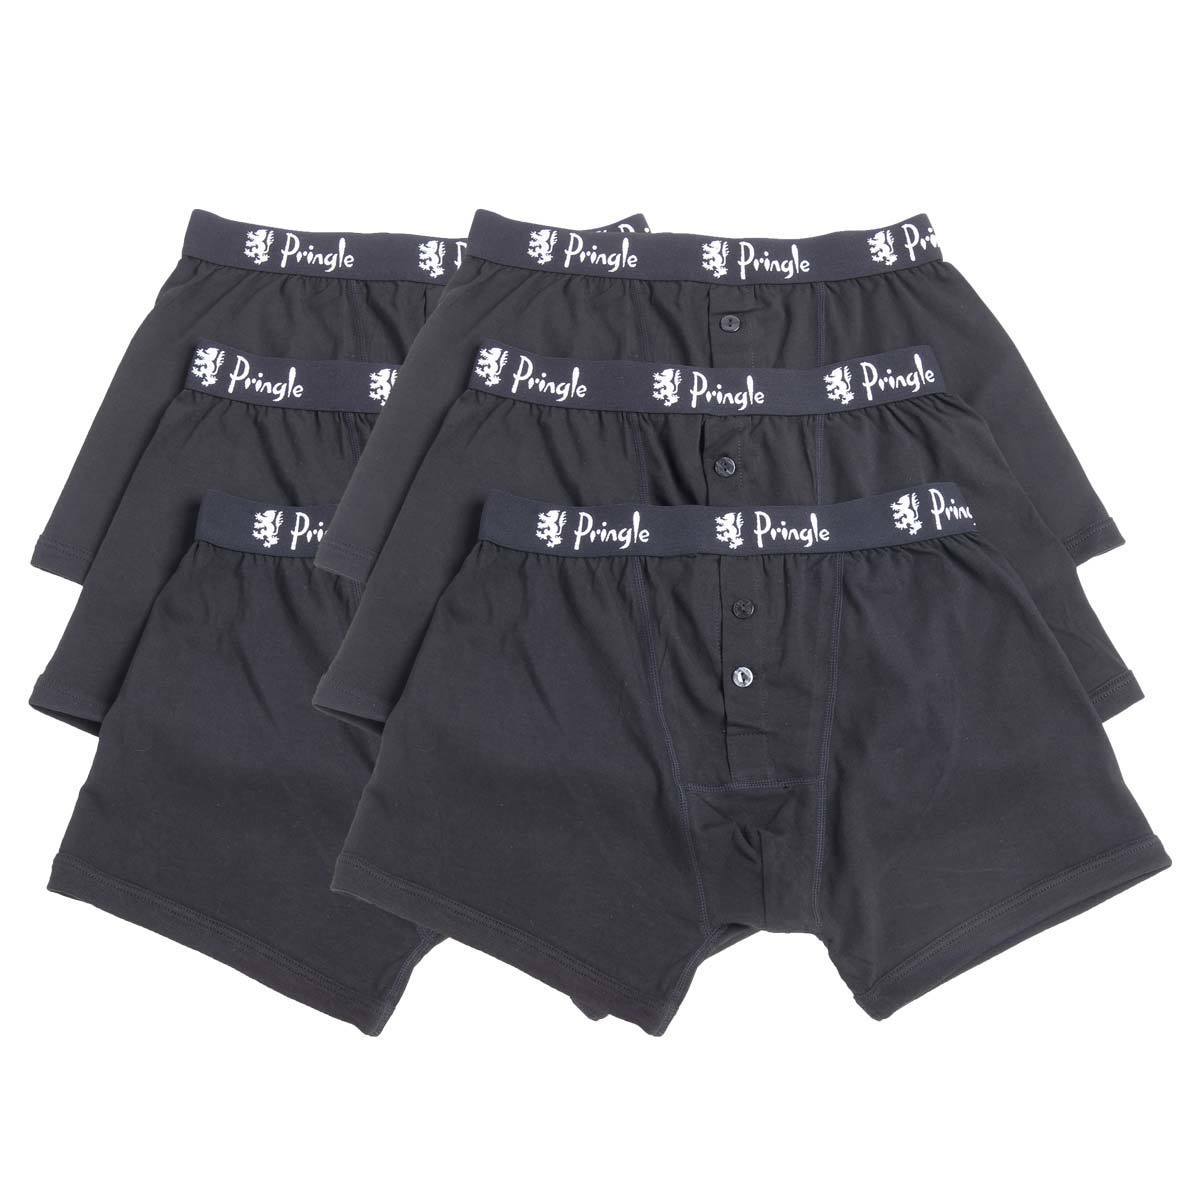 Pringle 2 x 3 - Pack William Men's Button Boxer Shorts in Black, Large